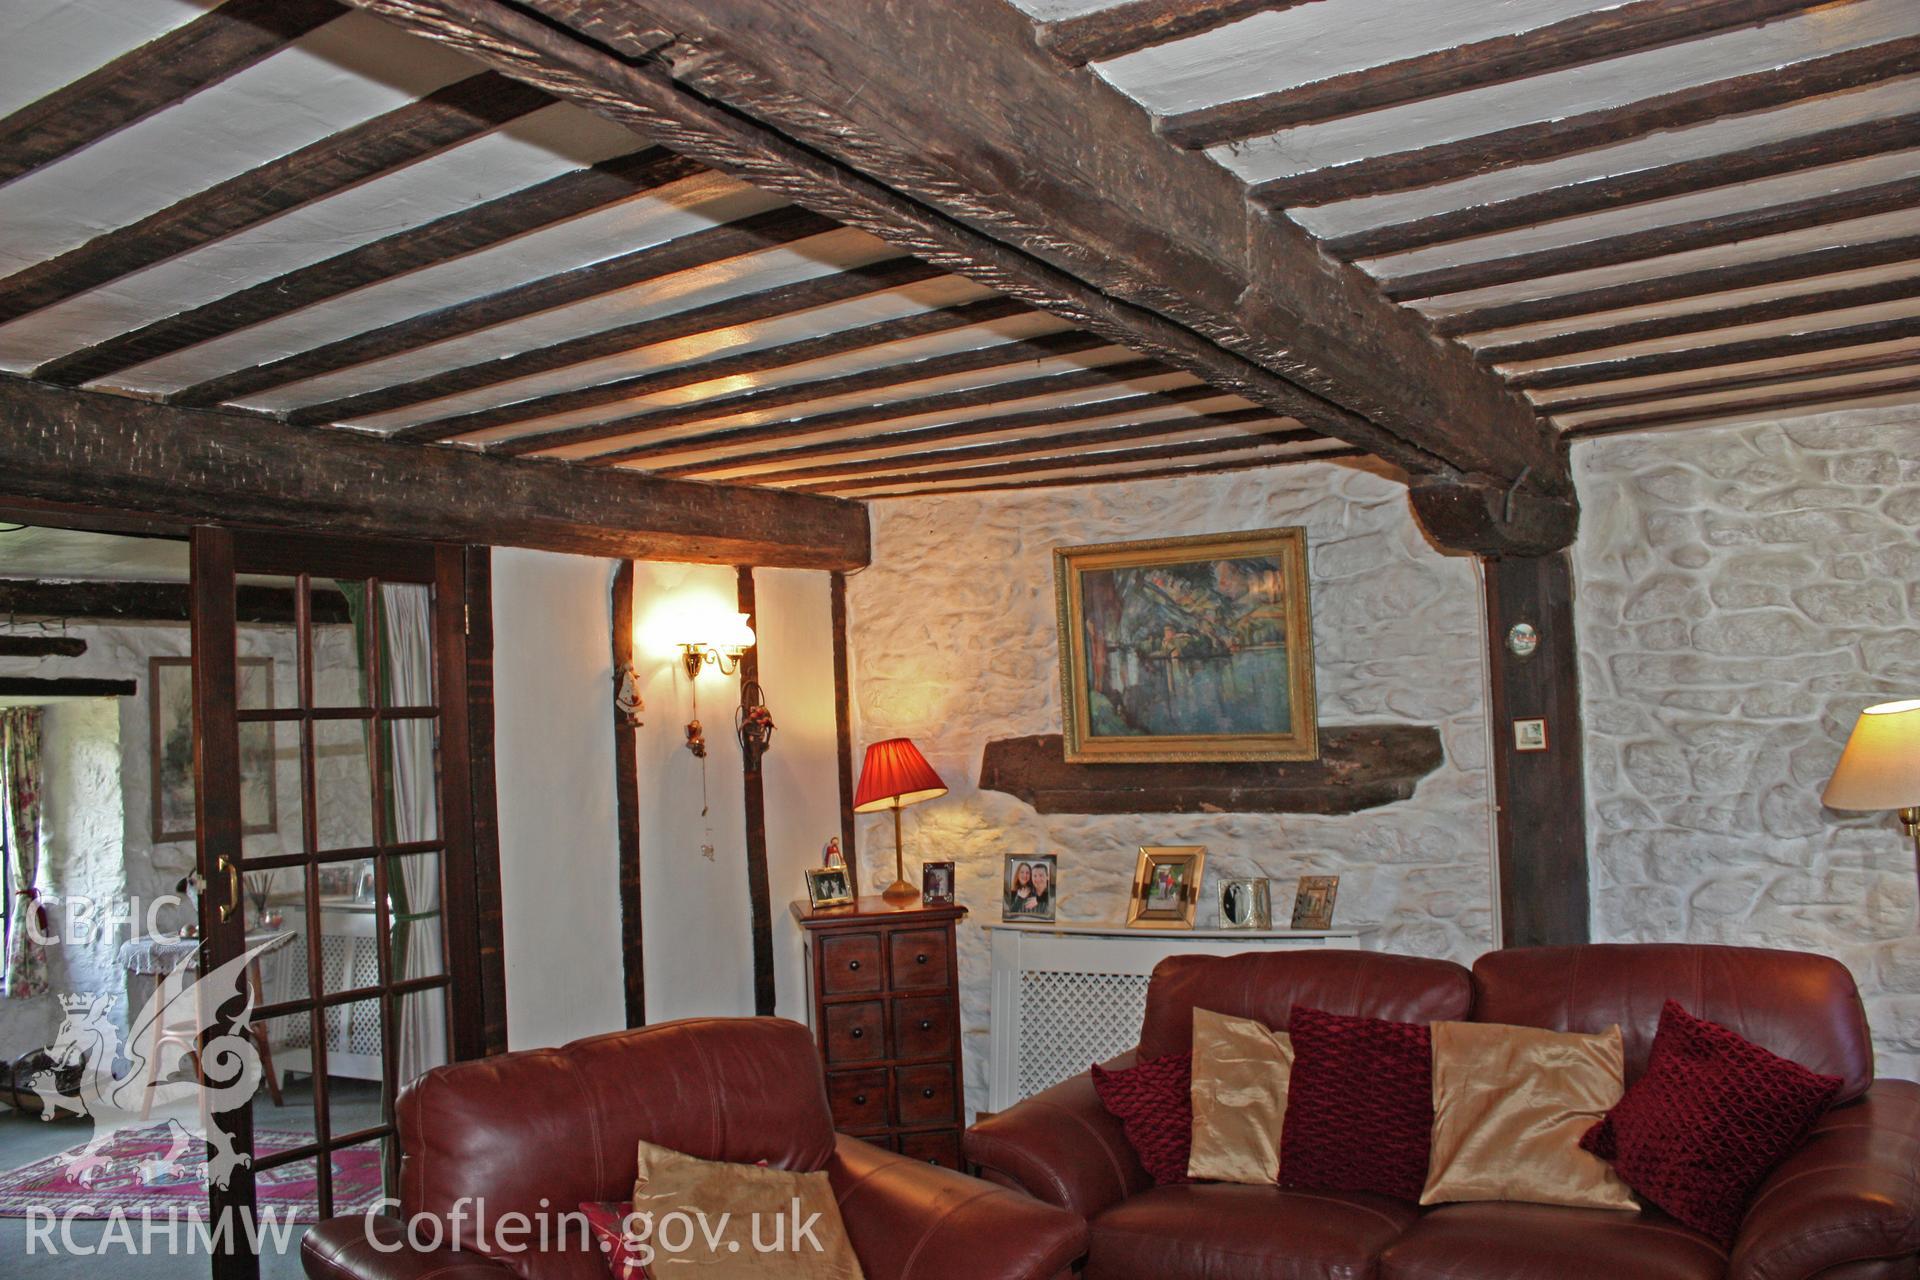 Glantywi House, interior view, grooved ceiling-beam to inner-room.